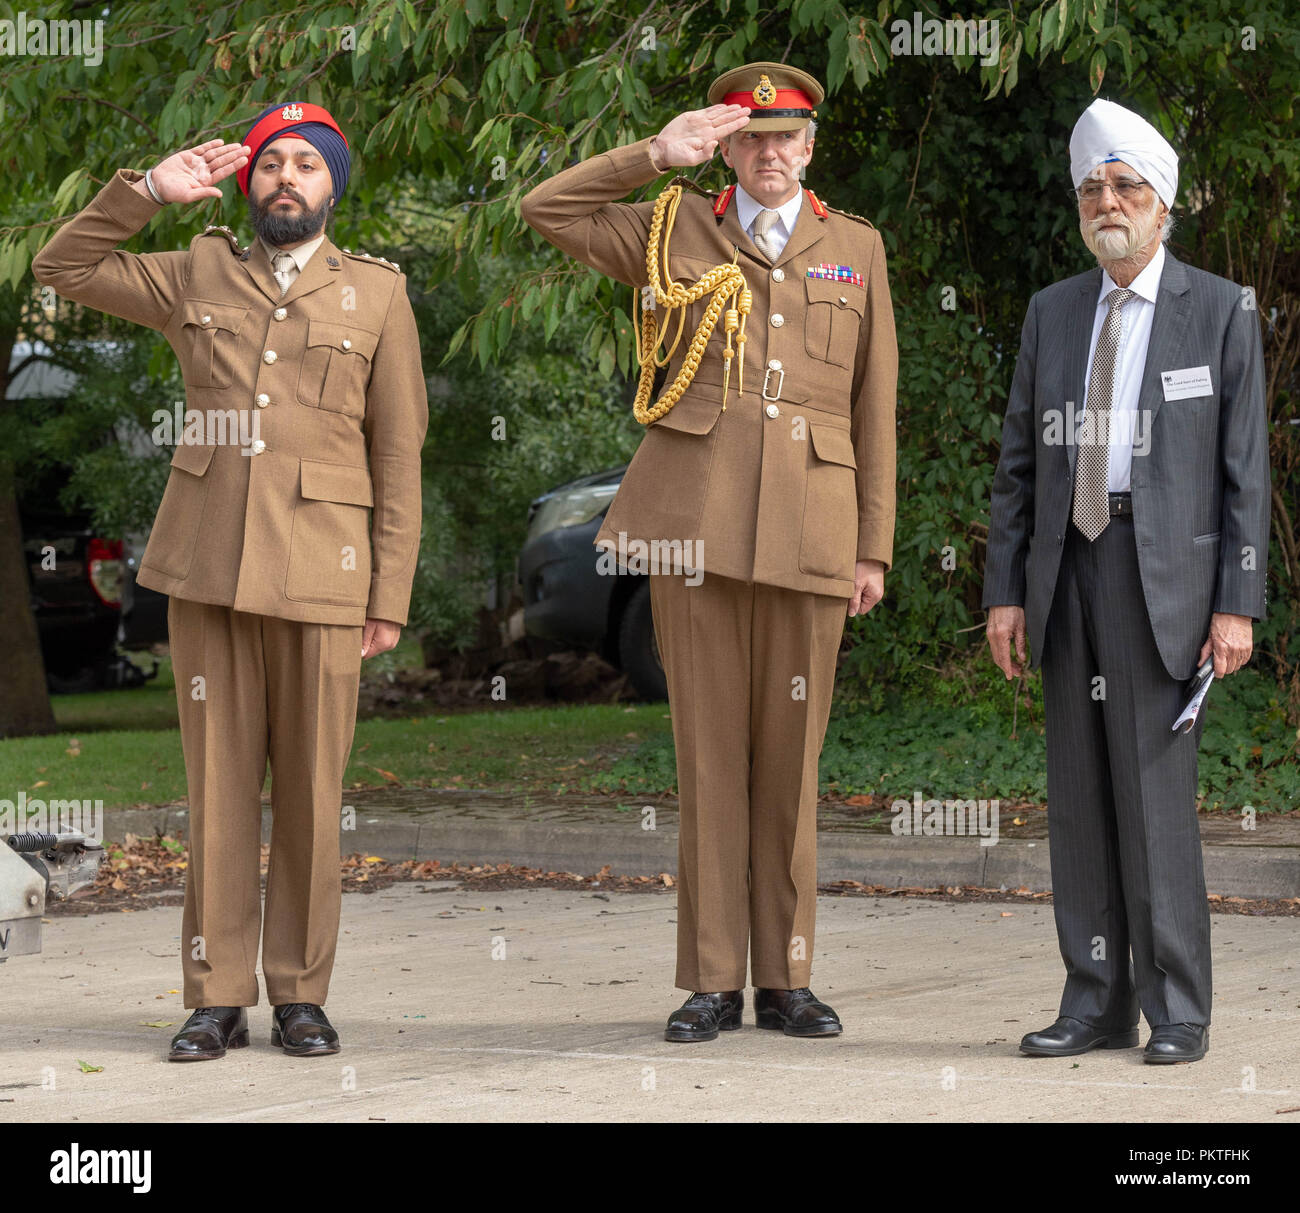 London 15th September 2018 UK Army open day to mark annual Saragarhi Commemorations This celebrates an epic battle where 21 Sikh soldiers took a last stand against 10,000 enemy tribesmen in 1897  Captain J Singh-Sohal,(left) and Major General Ben Bathurst CBE Officer Commanding London District, salute as last post is played at the event Credit Ian Davidson/Alamy Live News Stock Photo